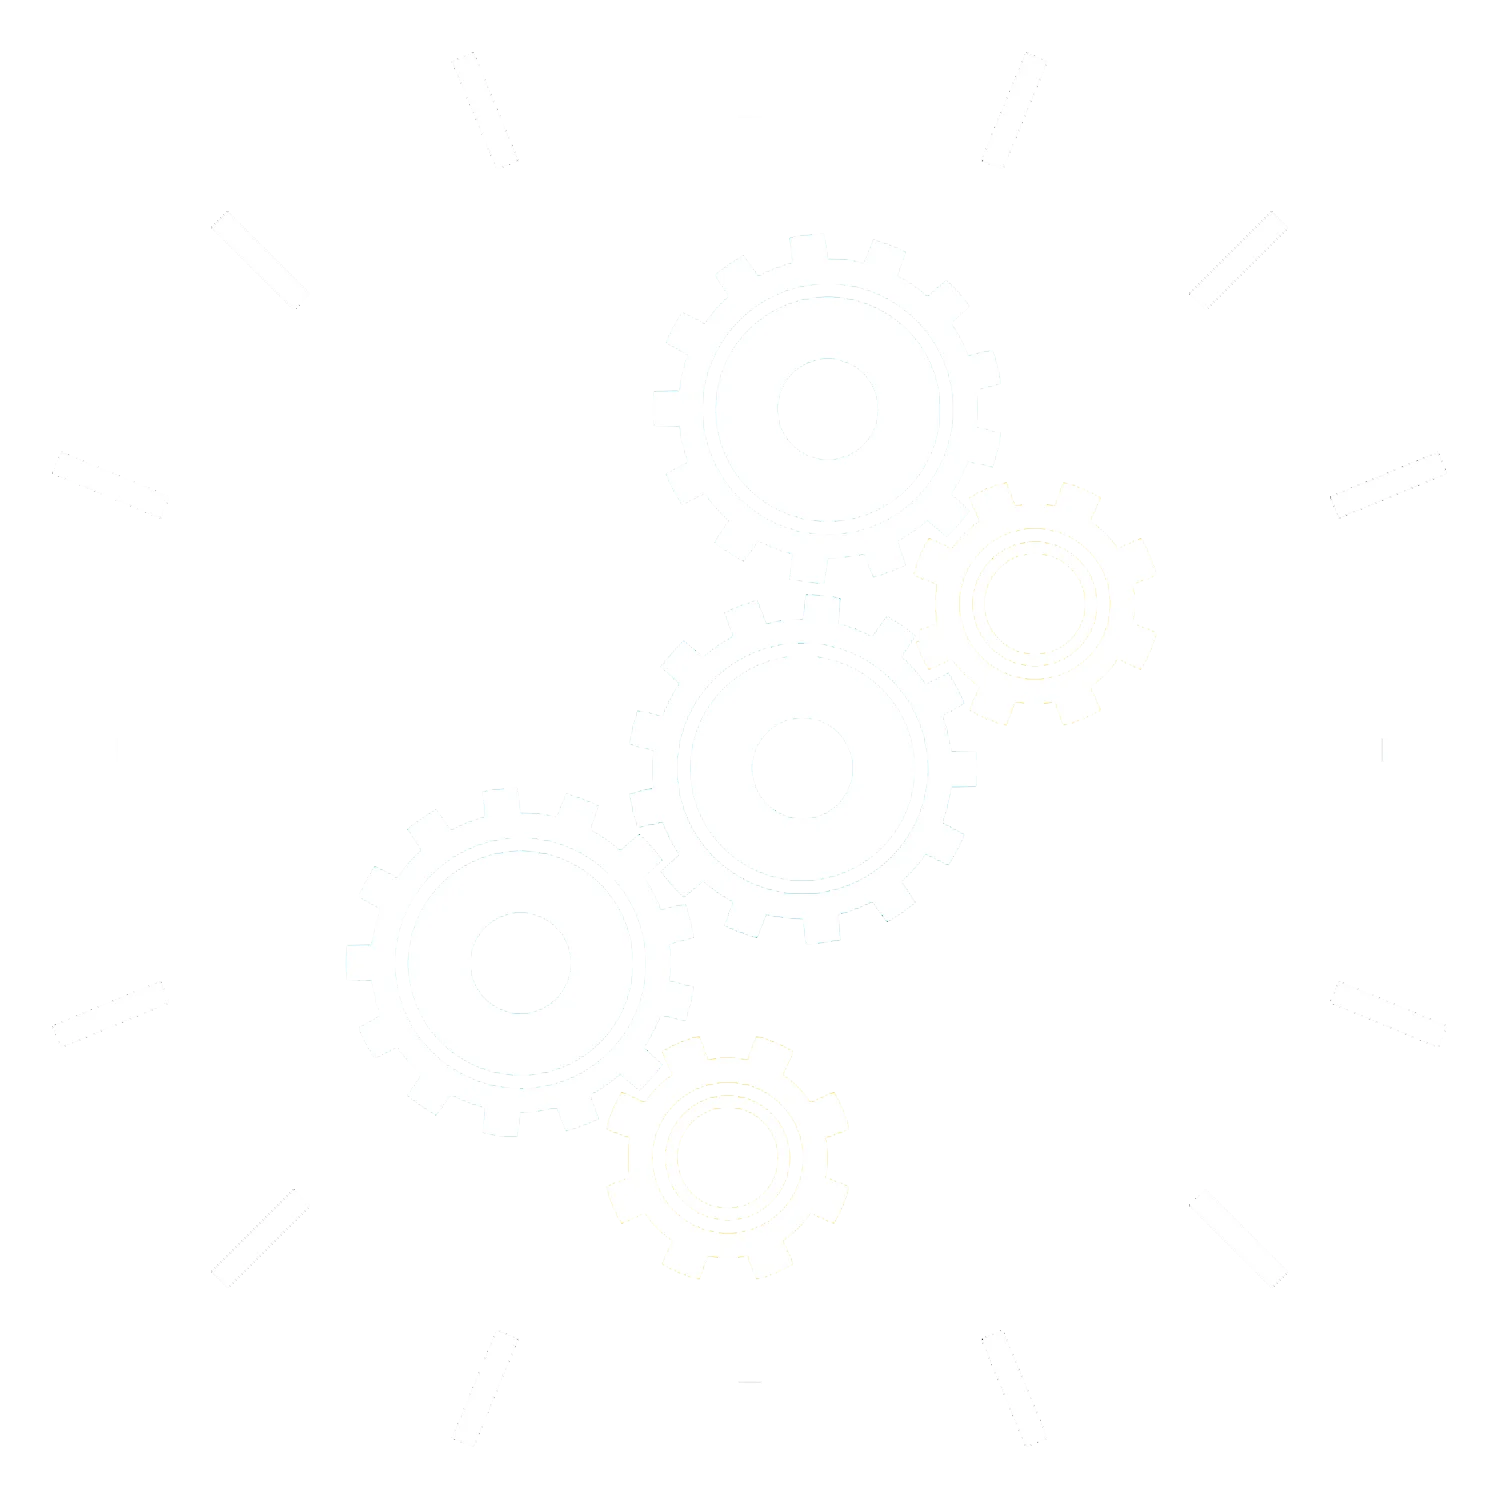 an image of a well organized gears 